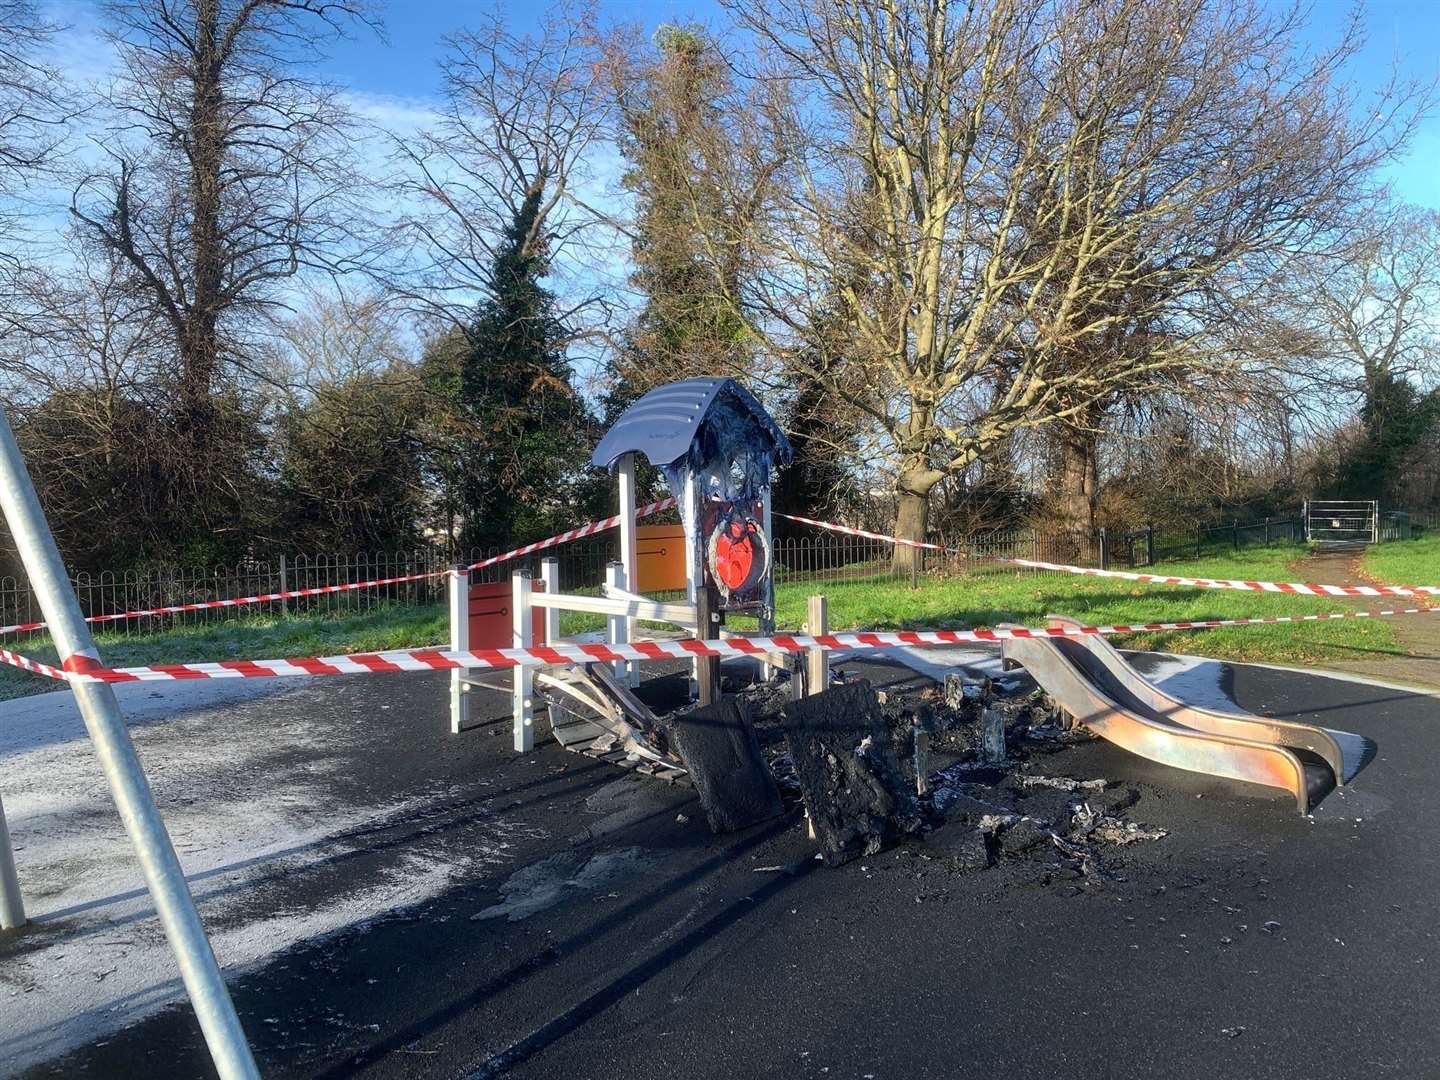 Children's play equipment in Windmill Hill park in Gravesend was set alight by vandals and an arson investigation has been launched by police. Picture: Gravesham Borough Council